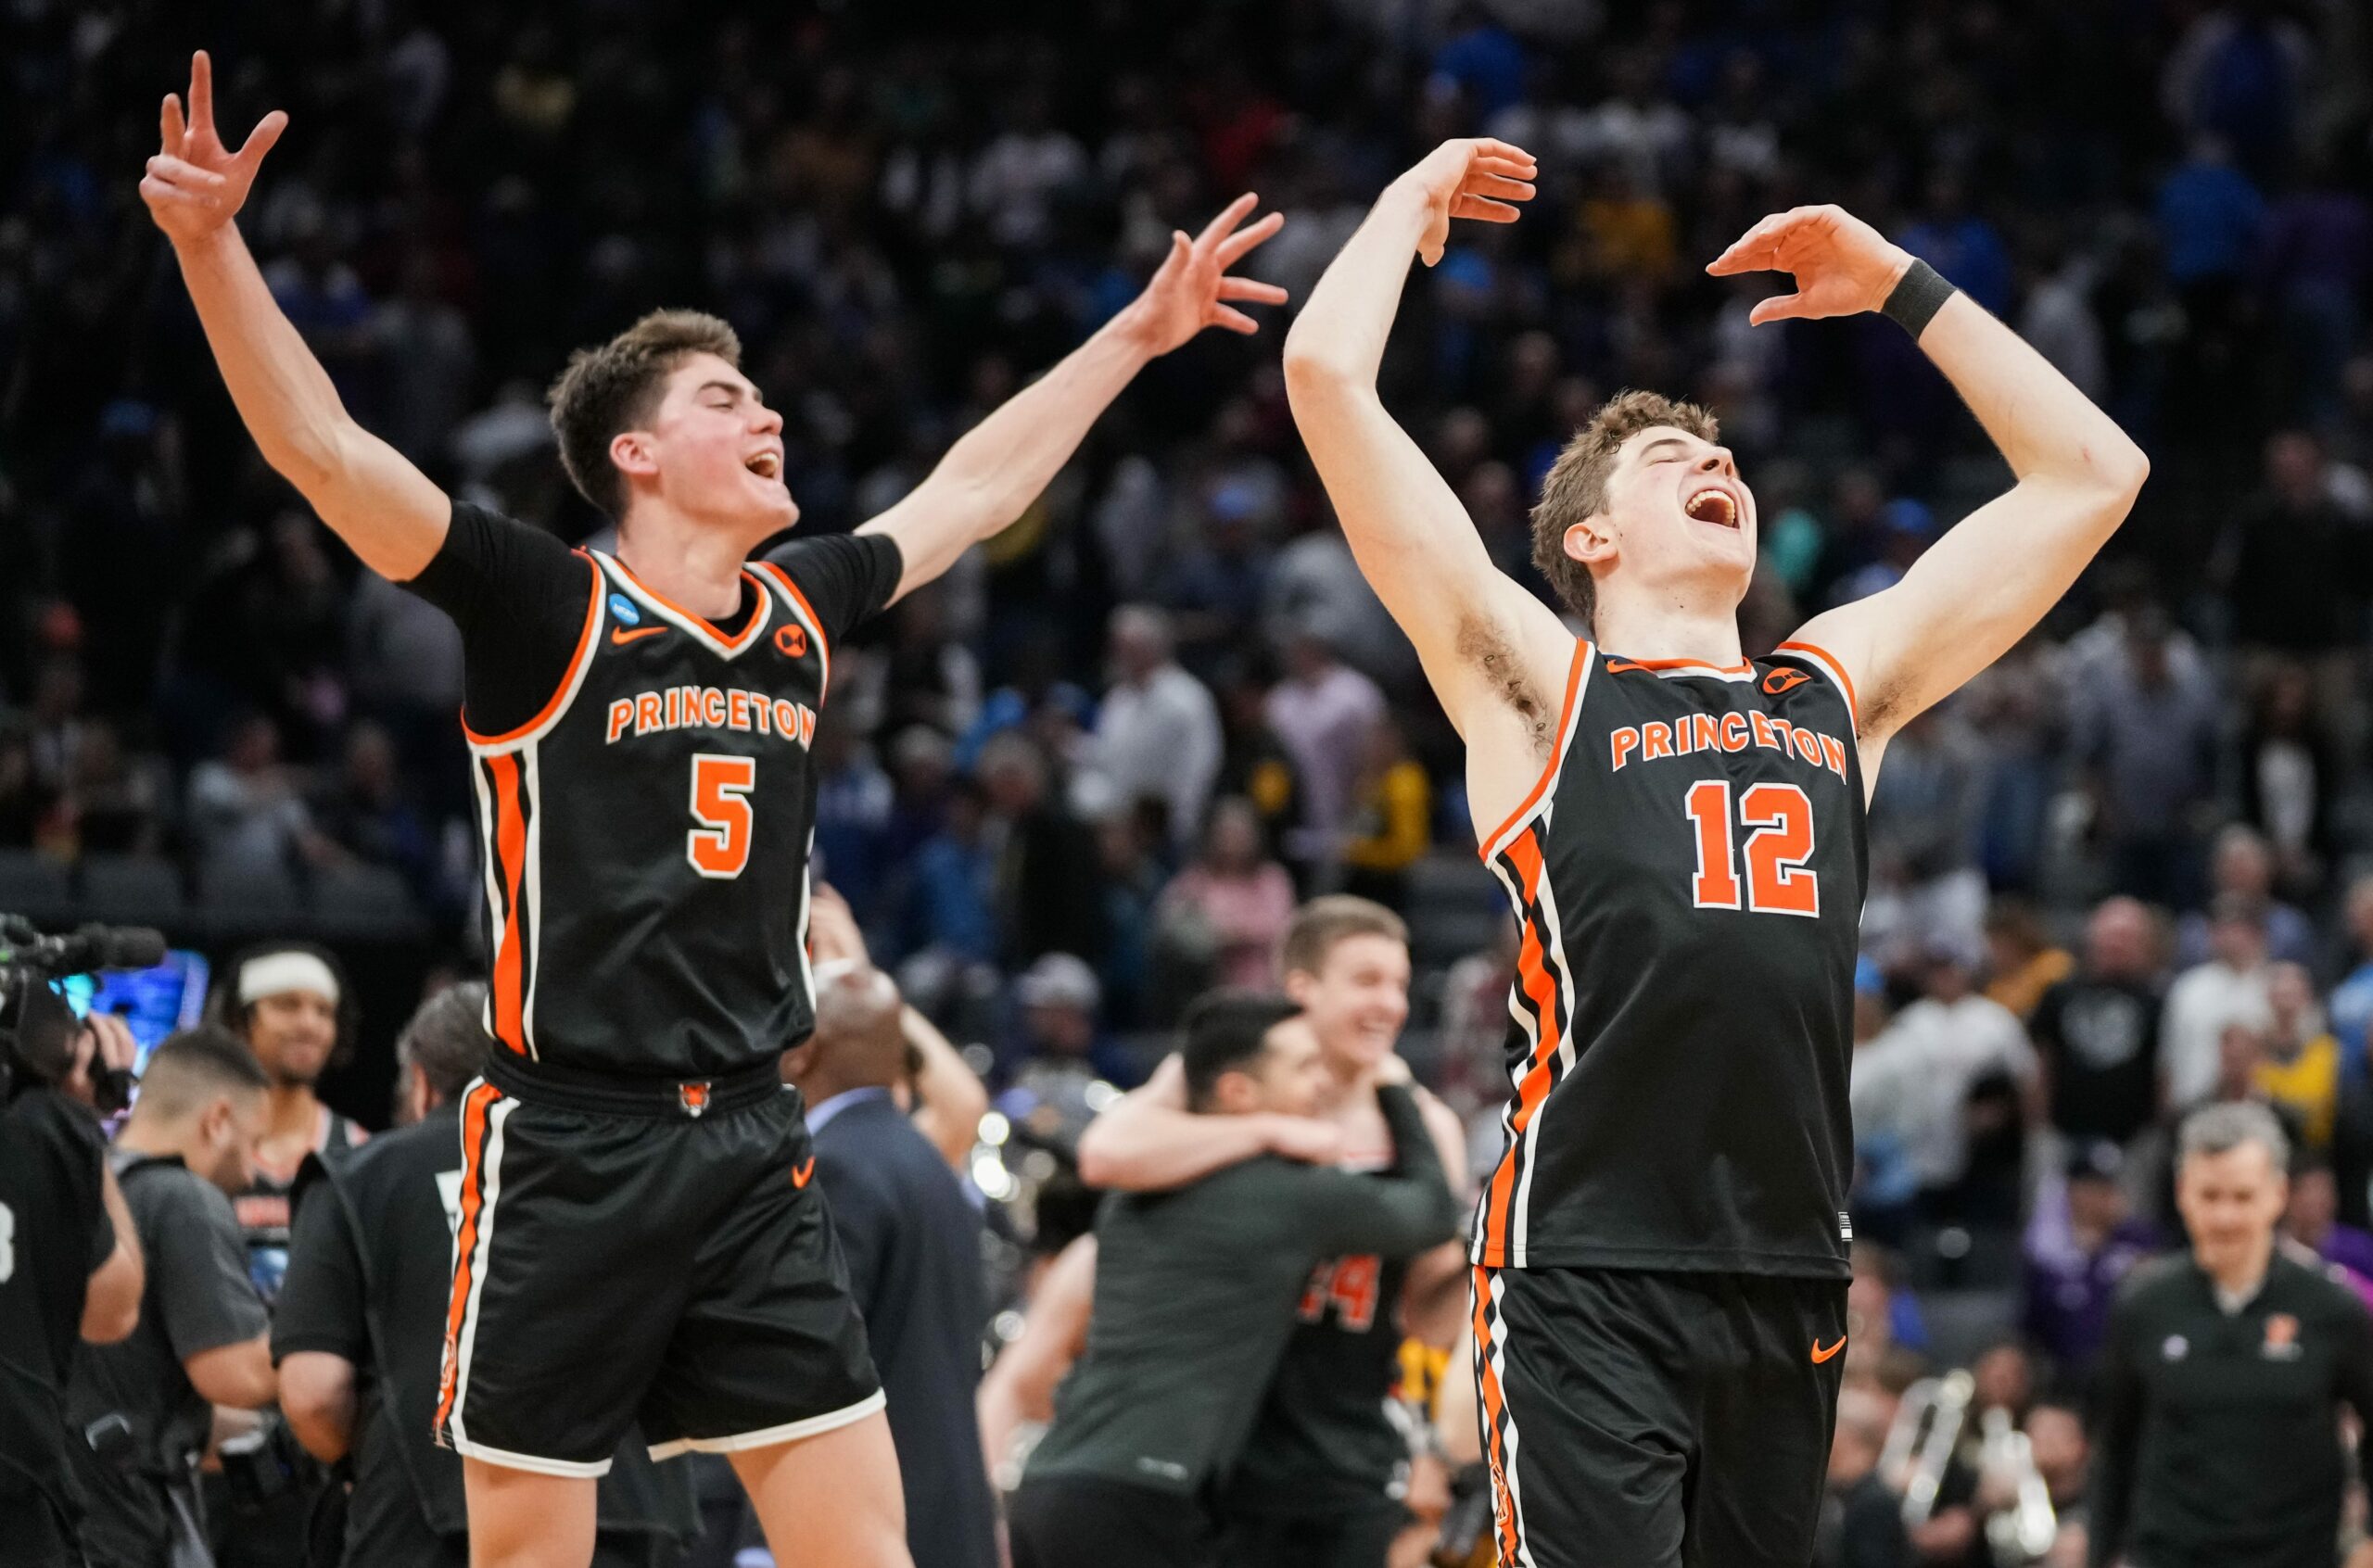 March Madness: Princeton vs. Creighton odds, picks and predictions